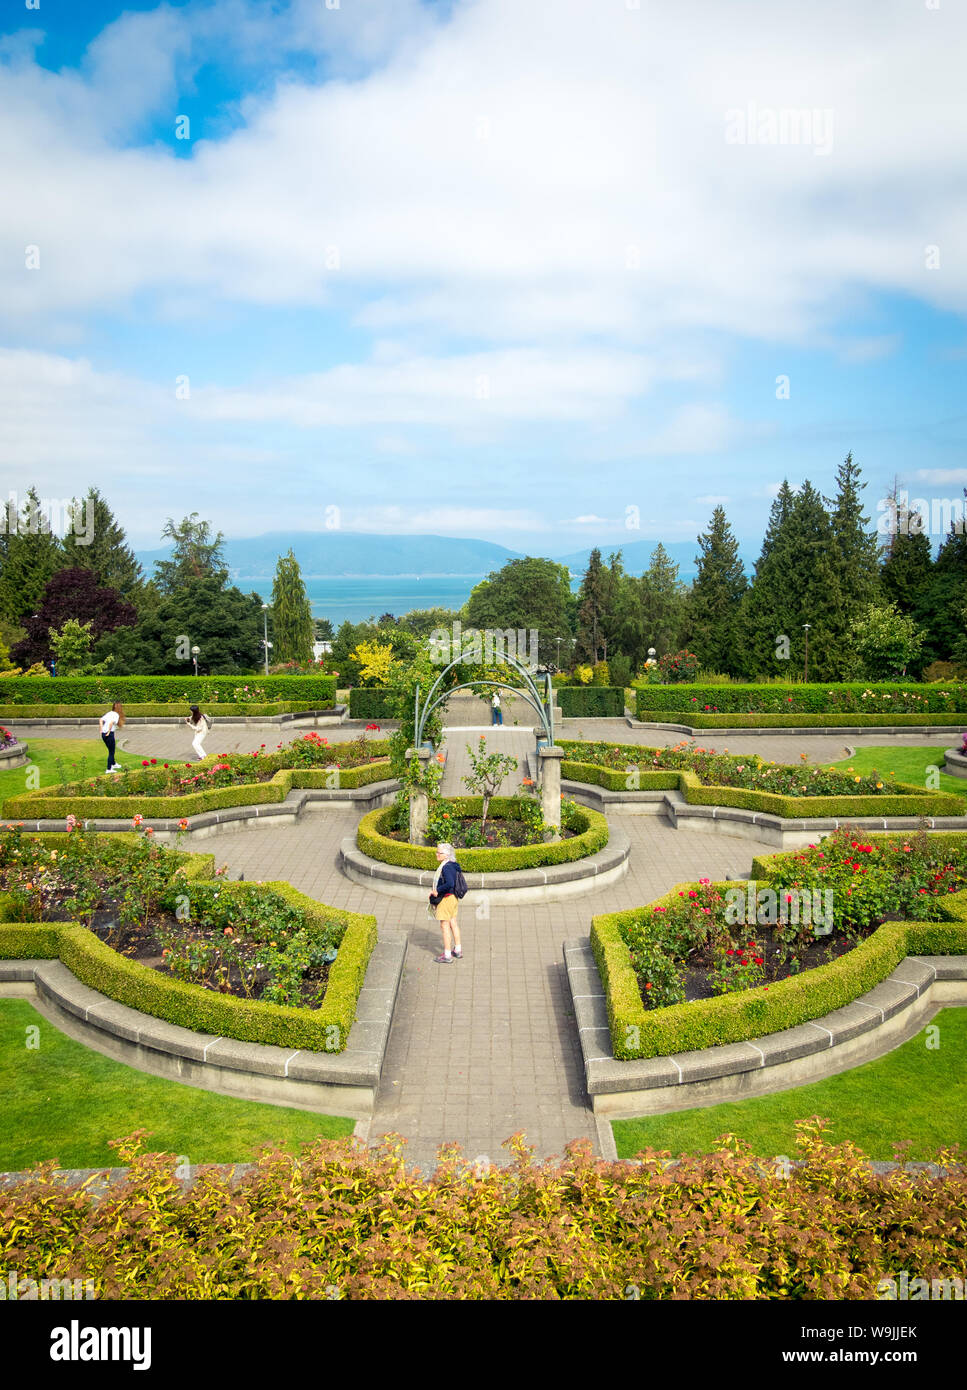 A view of the UBC Rose Garden (University of British Columbia Rose Garden) in Vancouver, British Columbia, Canada. Stock Photo